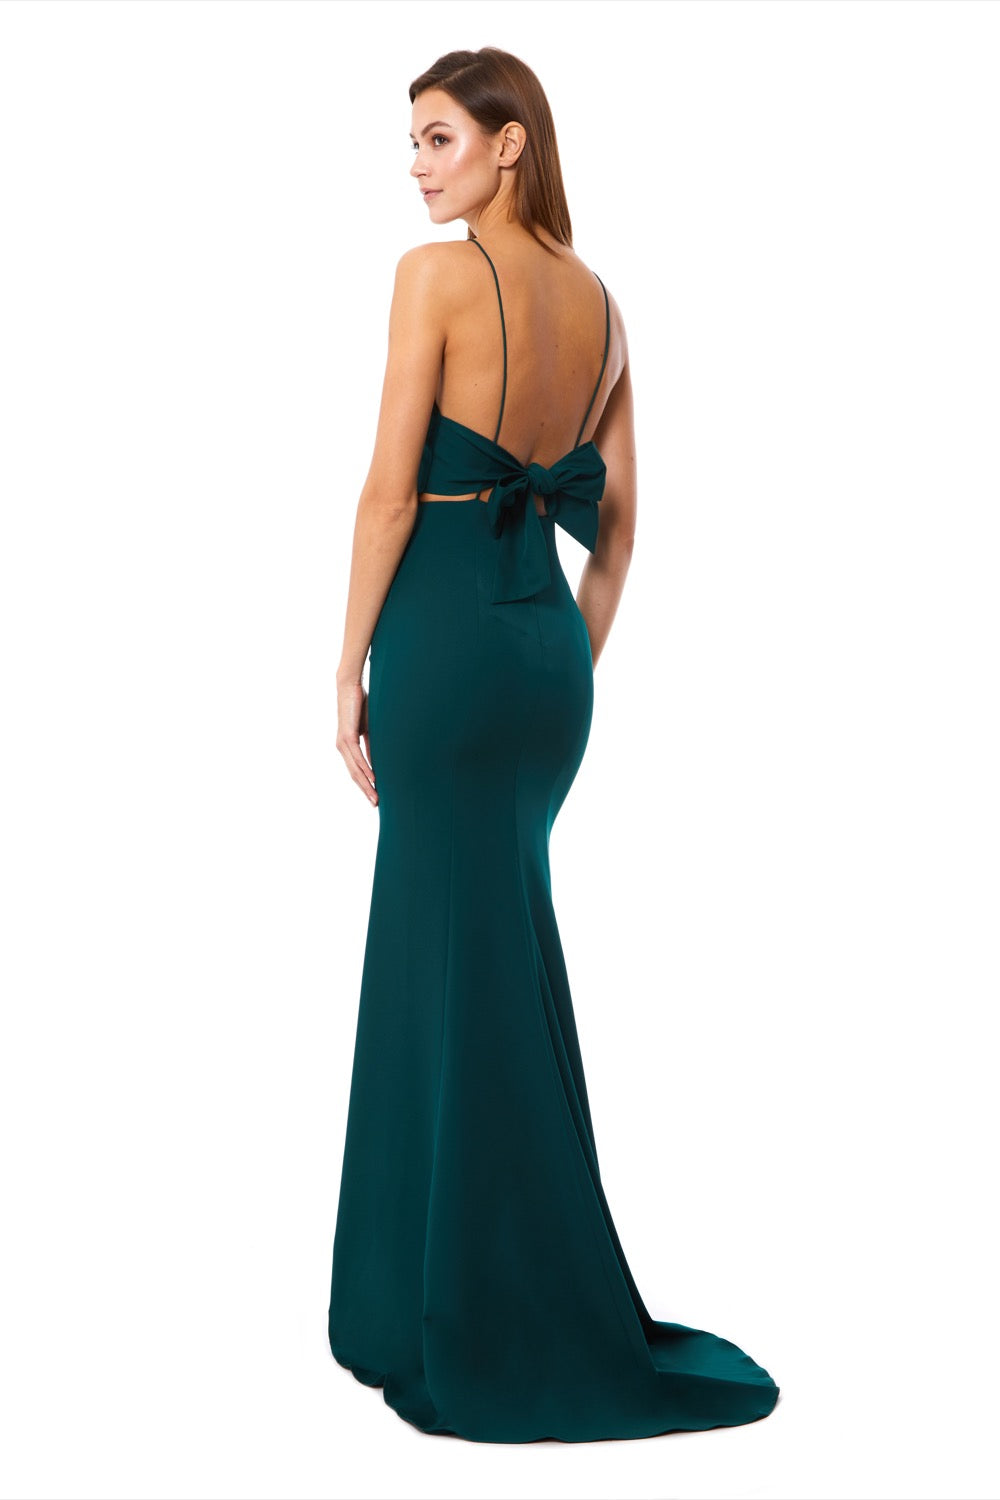 Jemima Square Neck Maxi Dress with Open Back, UK 12 / US 8 / EU 40 / Forest Green